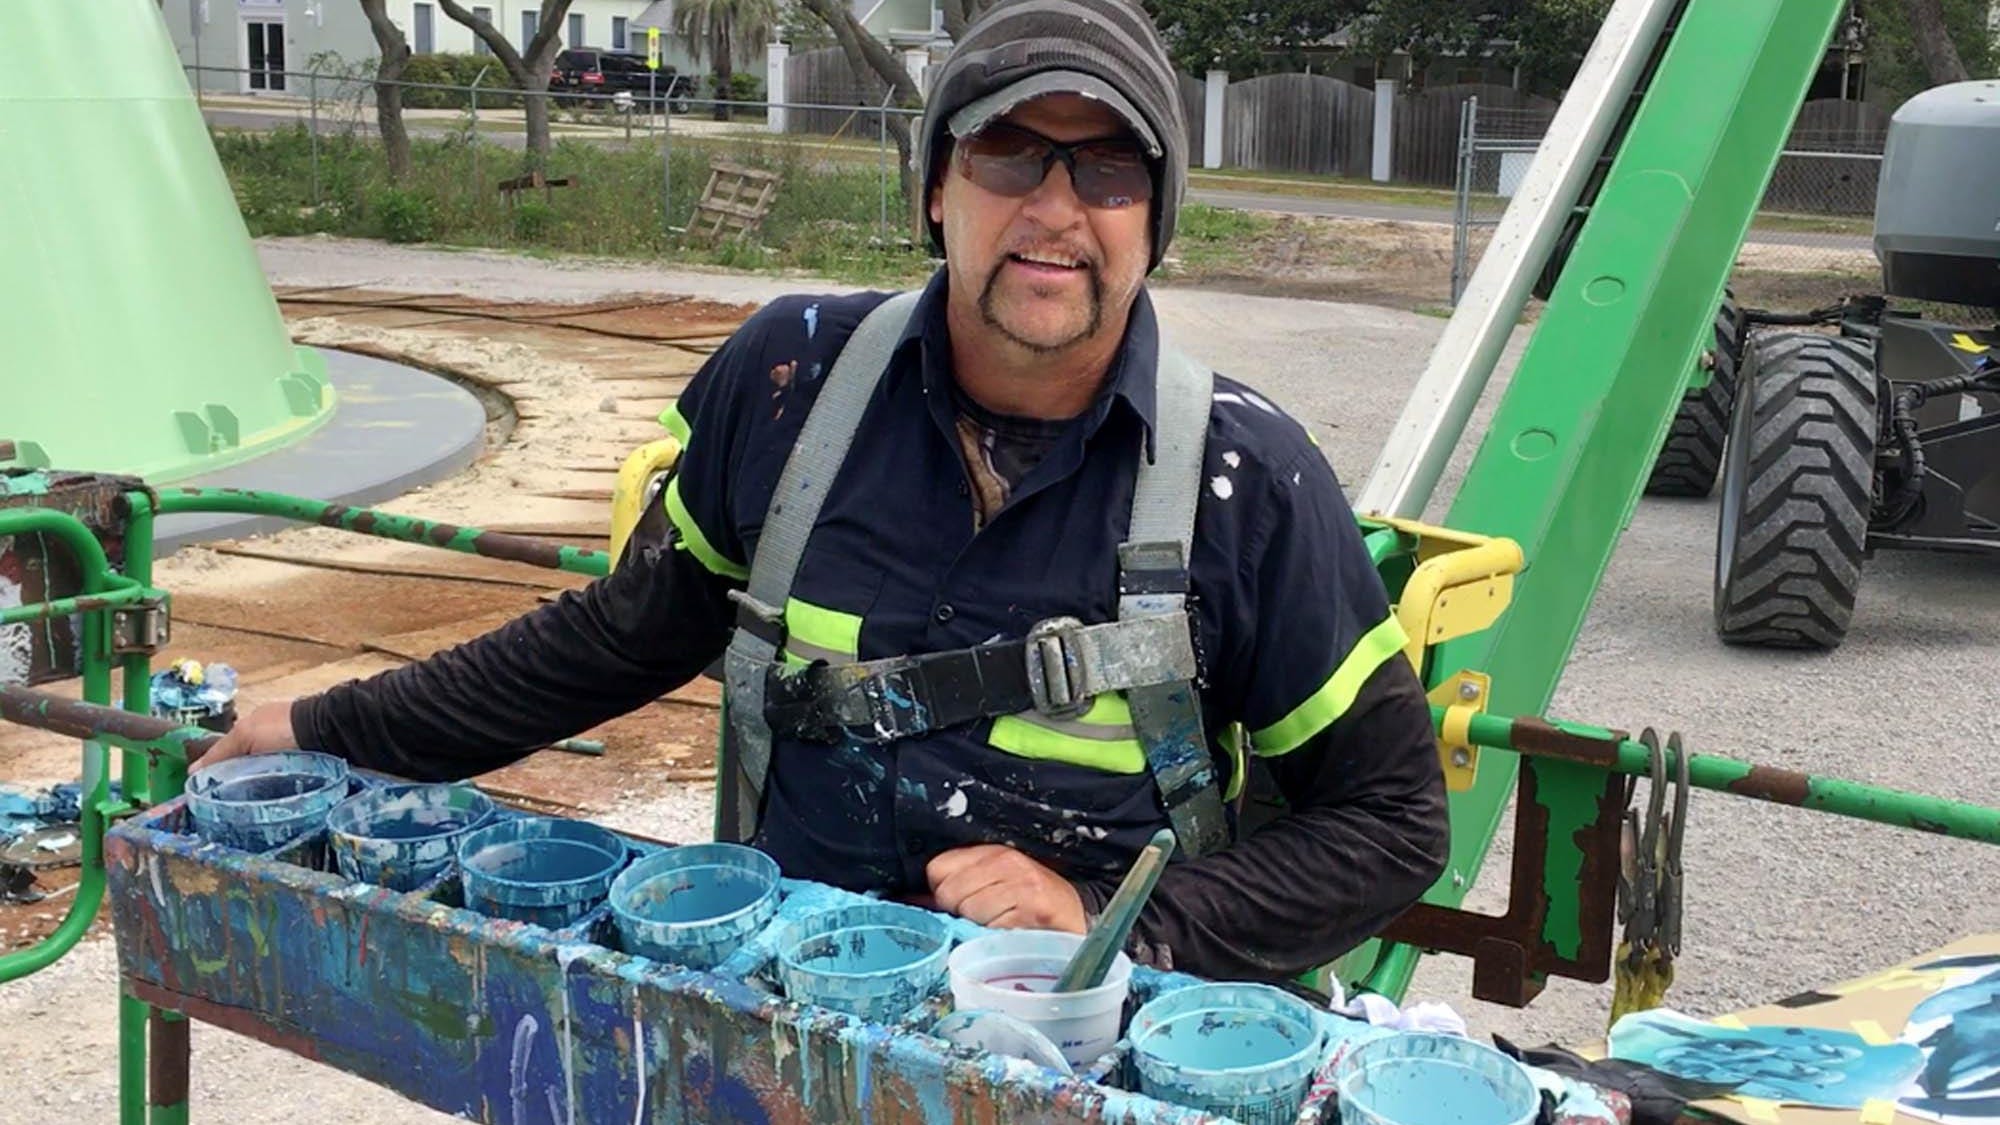 Artist Eric Henn poses with some of his paints in the bucket lift that he is using to paint sea life murals on the new water tower near Calhoun Avenue in Destin.